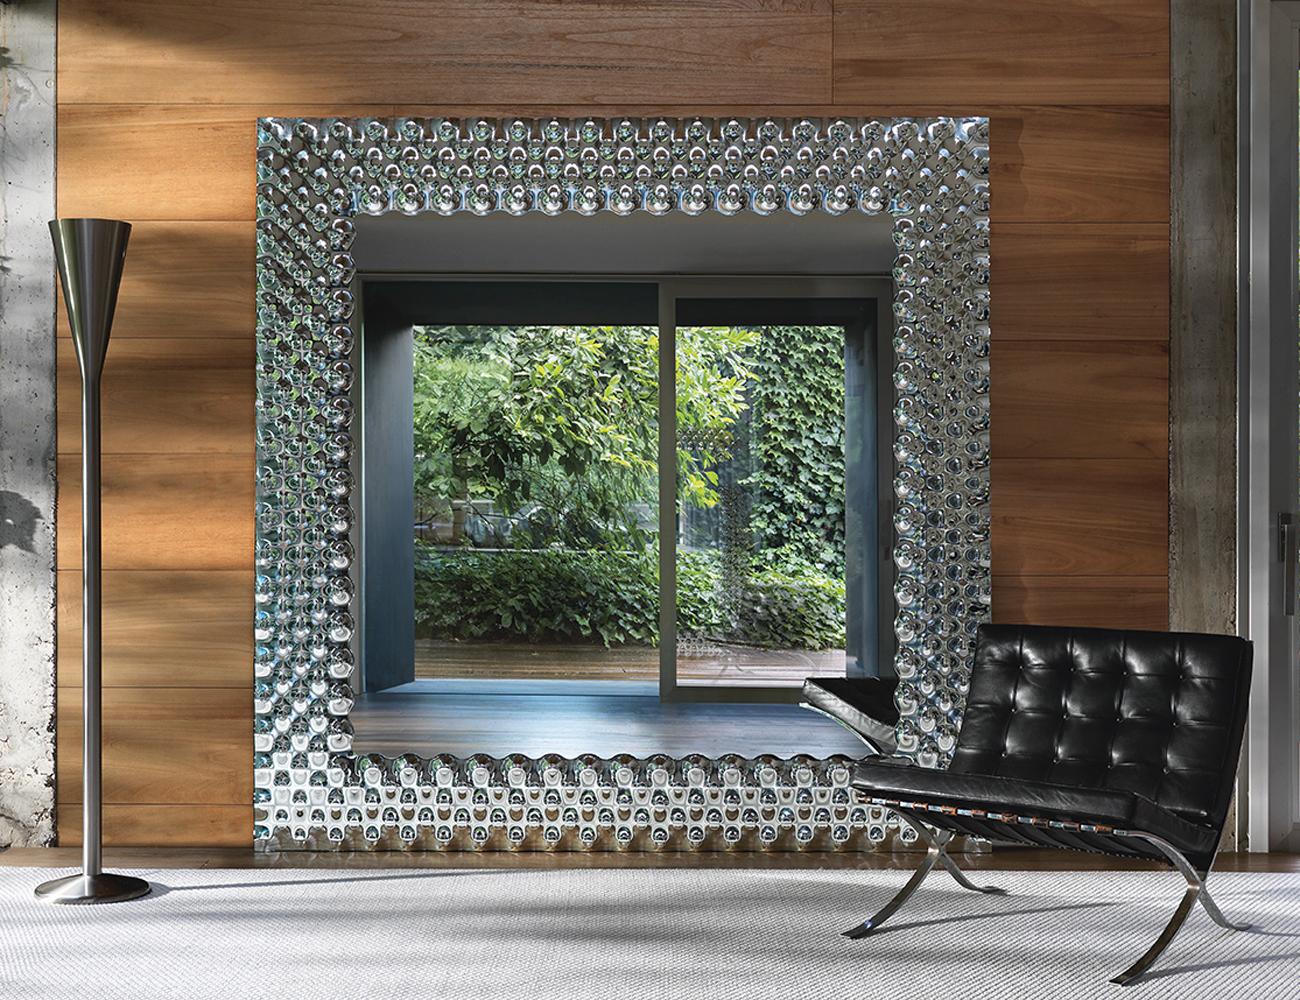 Mirror glass pearl square with high temperature
fused glass 6mm thickness and in back silvered finish.
With 5mm thikness flat mirror glass. With metal painted
frame. Available in:
L 86 x D 4 x H 86cm, price: 2900,00€.
L 206 x D 4 x H 206cm,